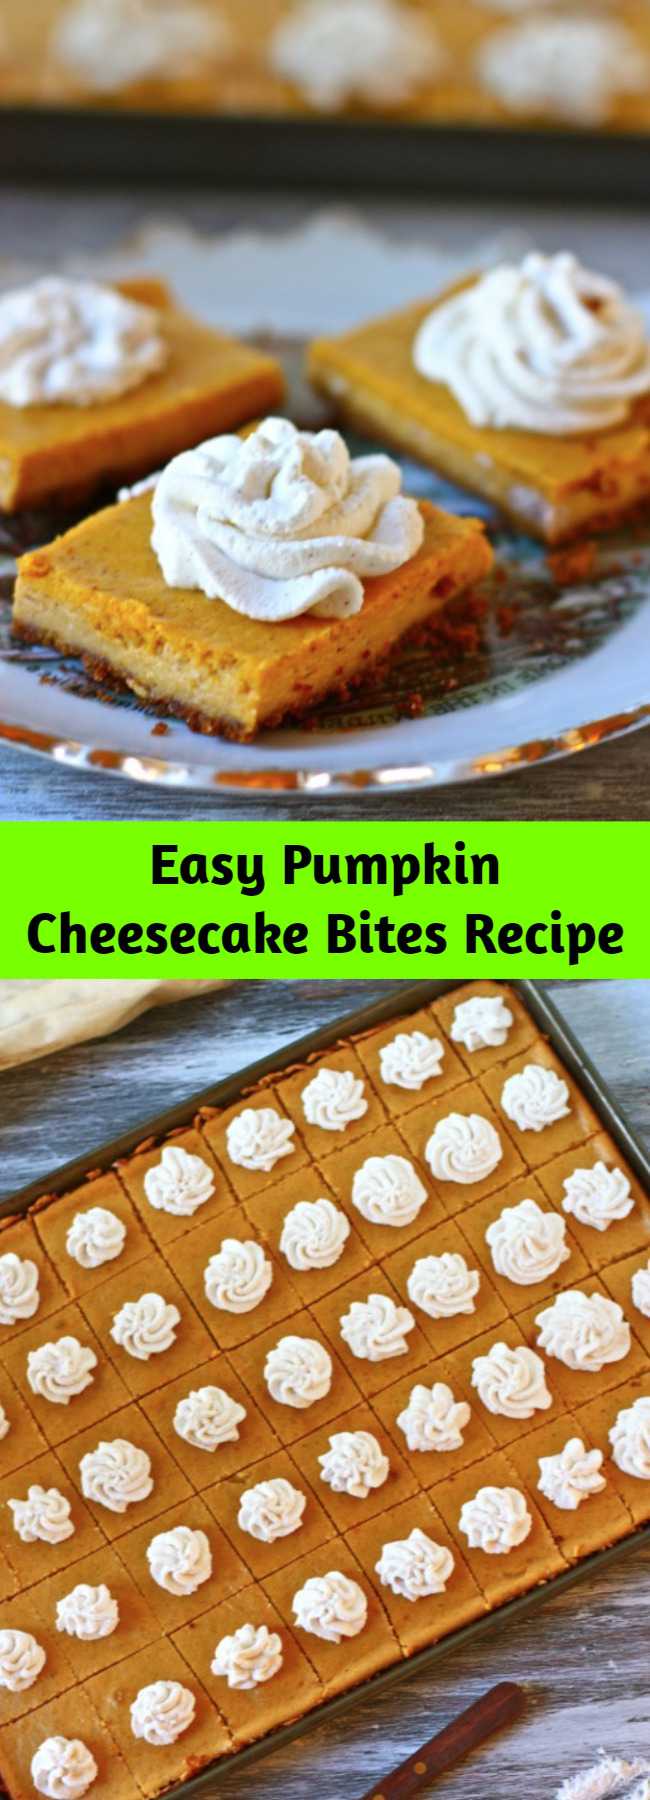 Easy Pumpkin Cheesecake Bites Recipe - These pumpkin cheesecake bites are for all the non-pumpkin pie lovers in the world…along with everyone else. They’re great to make to feed a crowd, but also great as something small and sweet after any ol’ dinner. Just a warning: they are highly addictive.